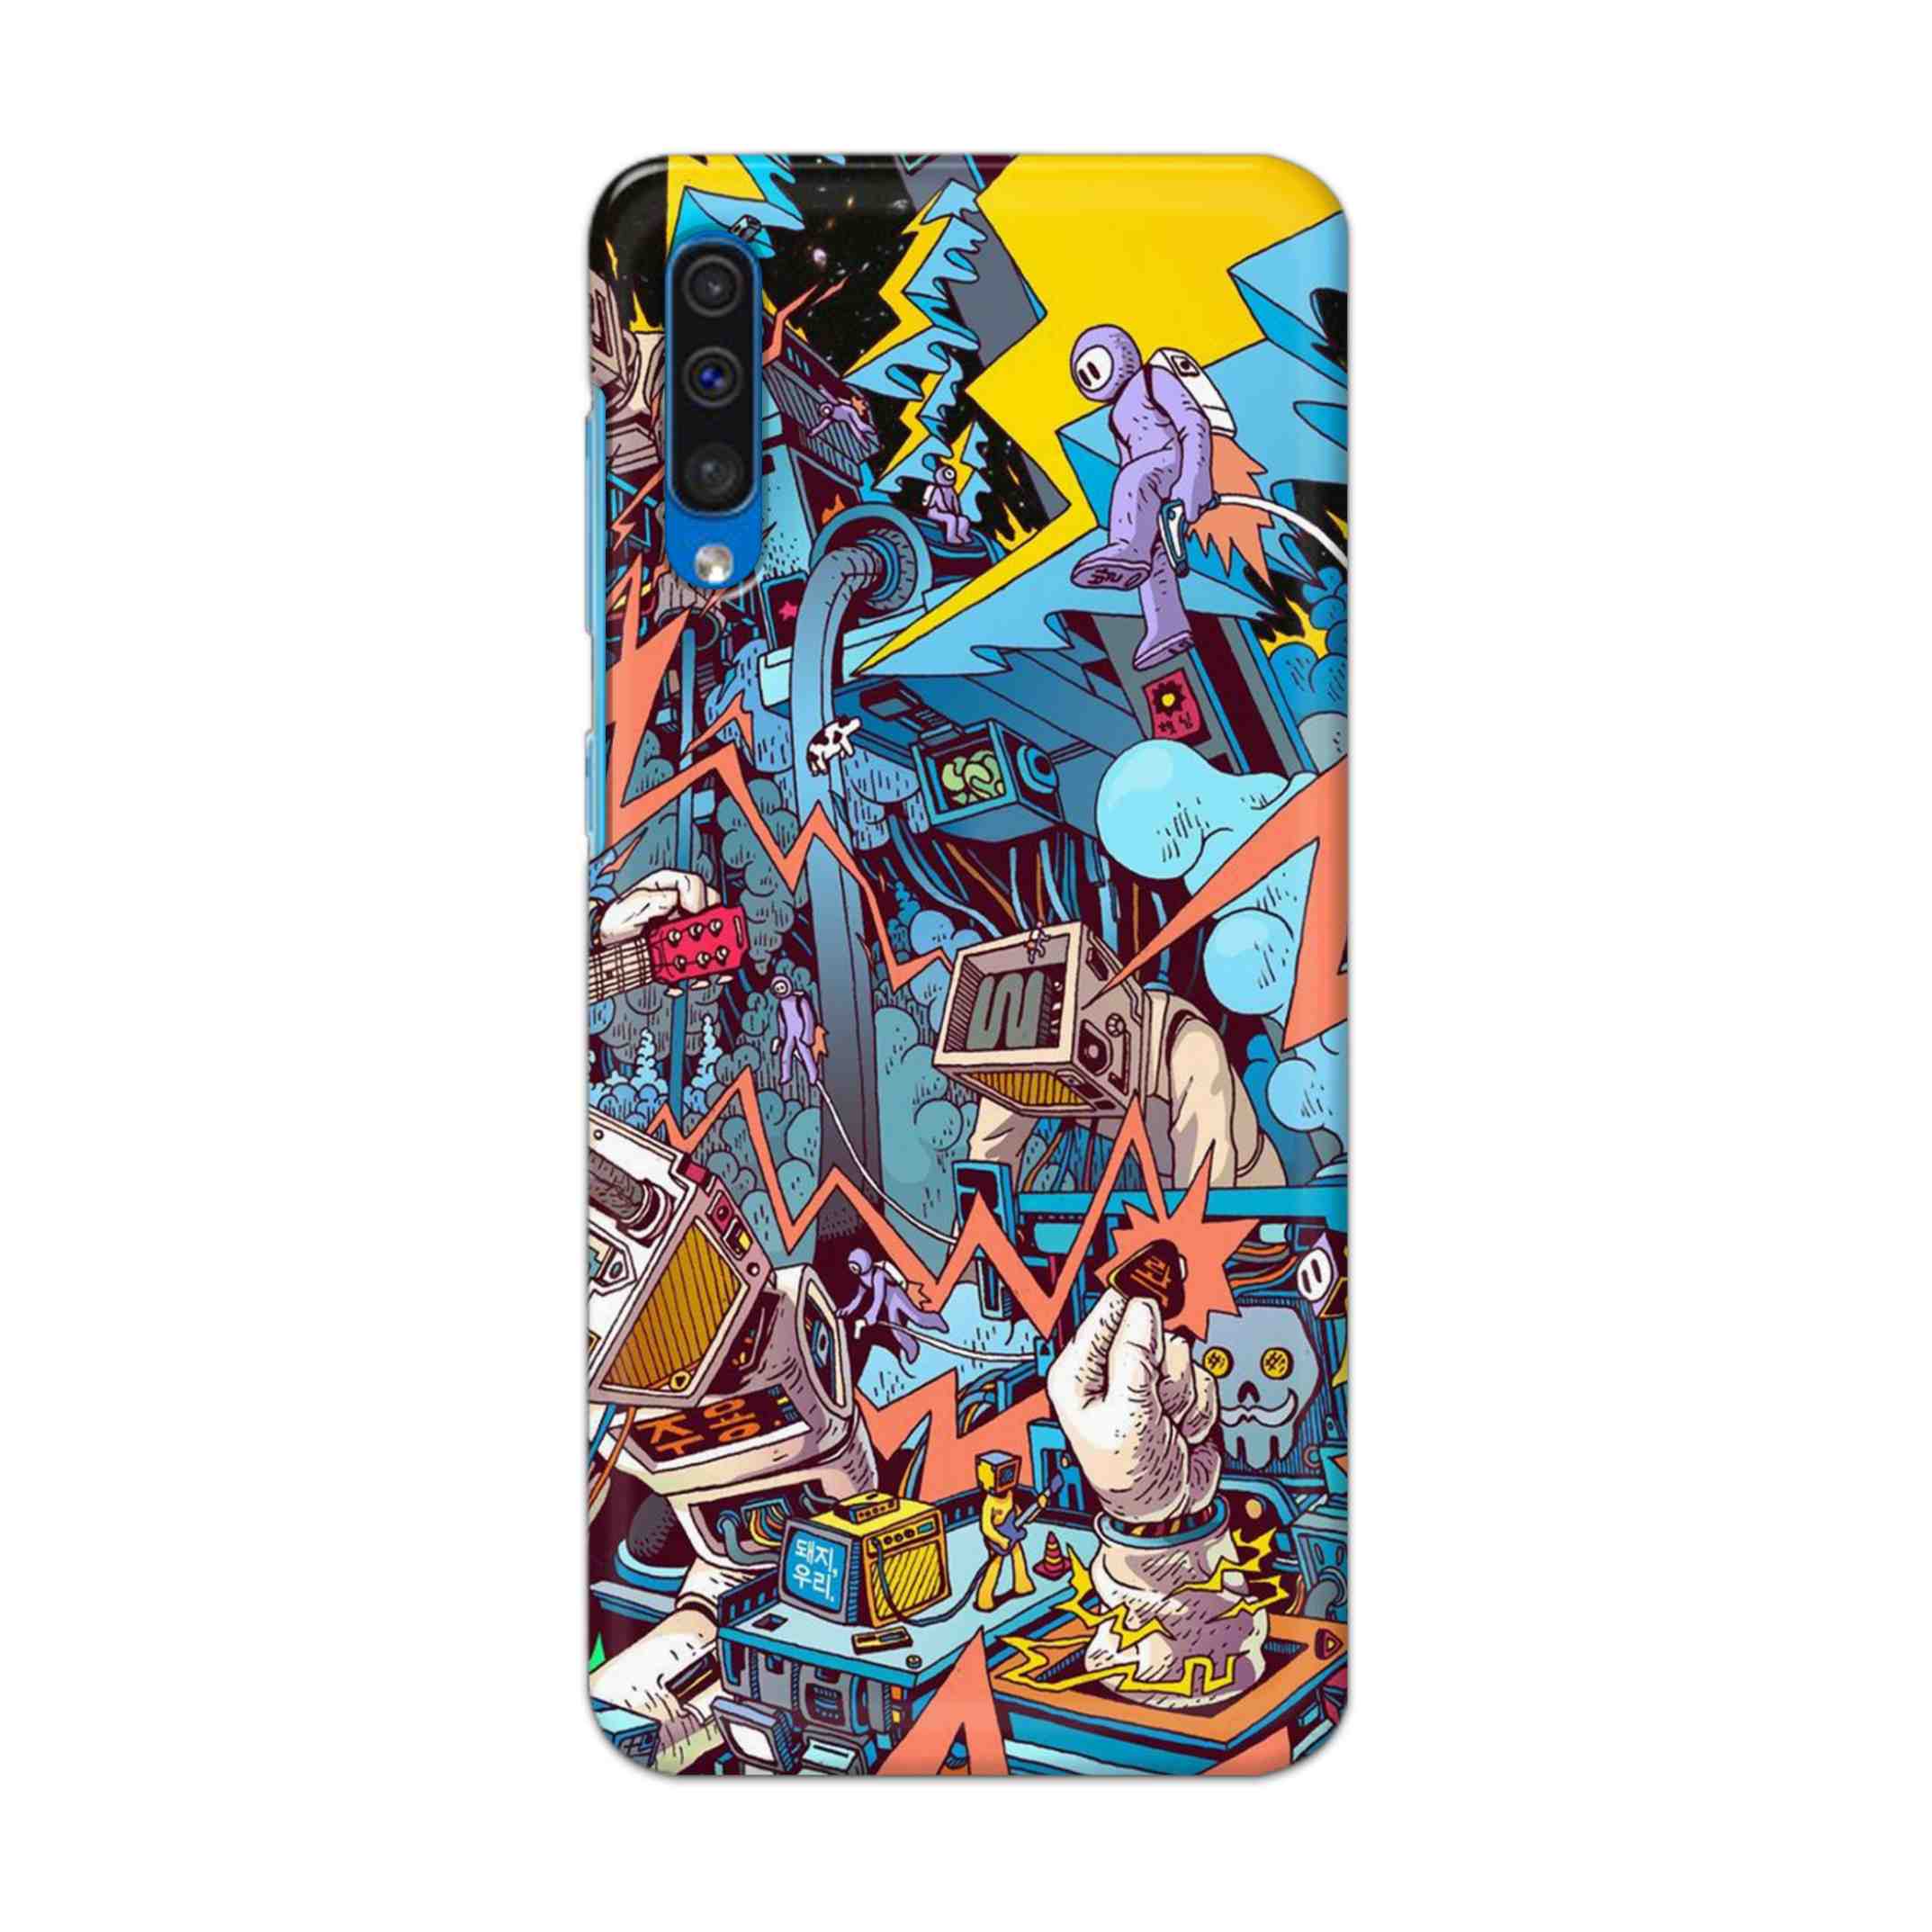 Buy Ofo Panic Hard Back Mobile Phone Case Cover For Samsung Galaxy A50 / A50s / A30s Online